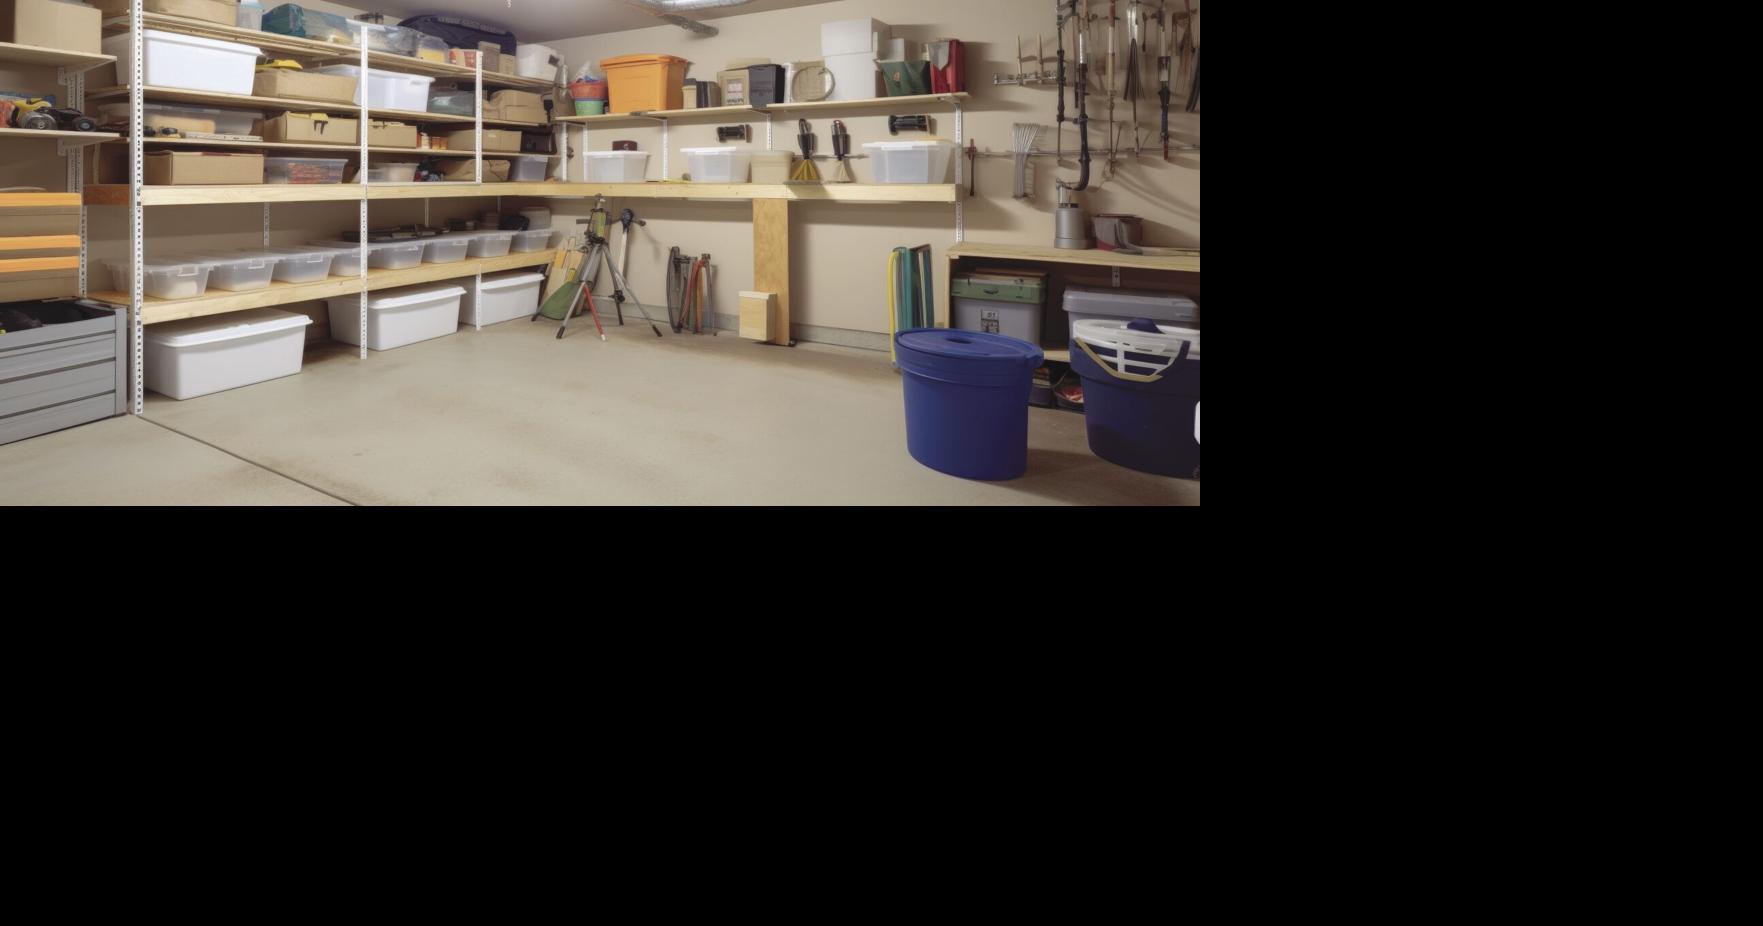 Storage solutions: Make efficient use of garage spaces, Your Home